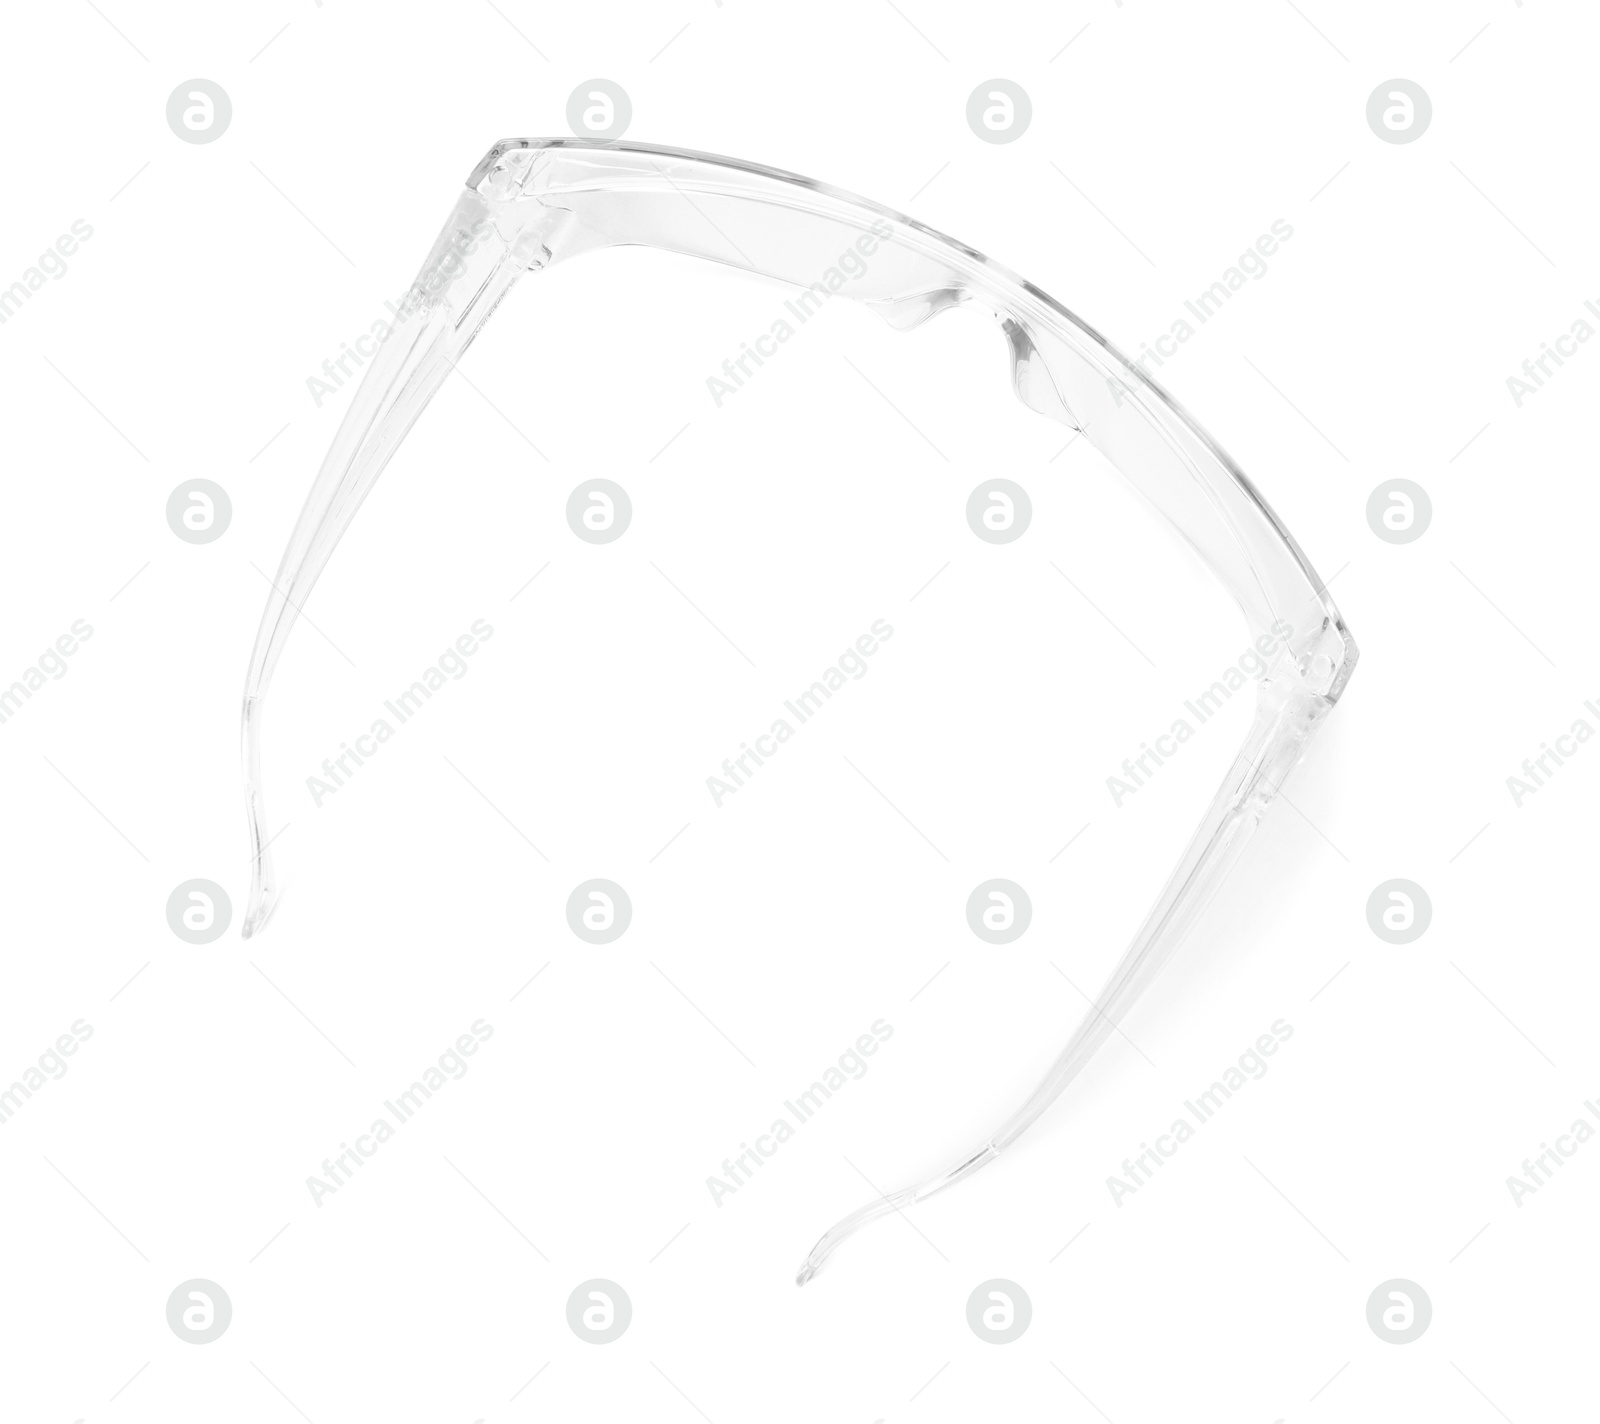 Photo of Protective goggles isolated on white, top view. Safety equipment